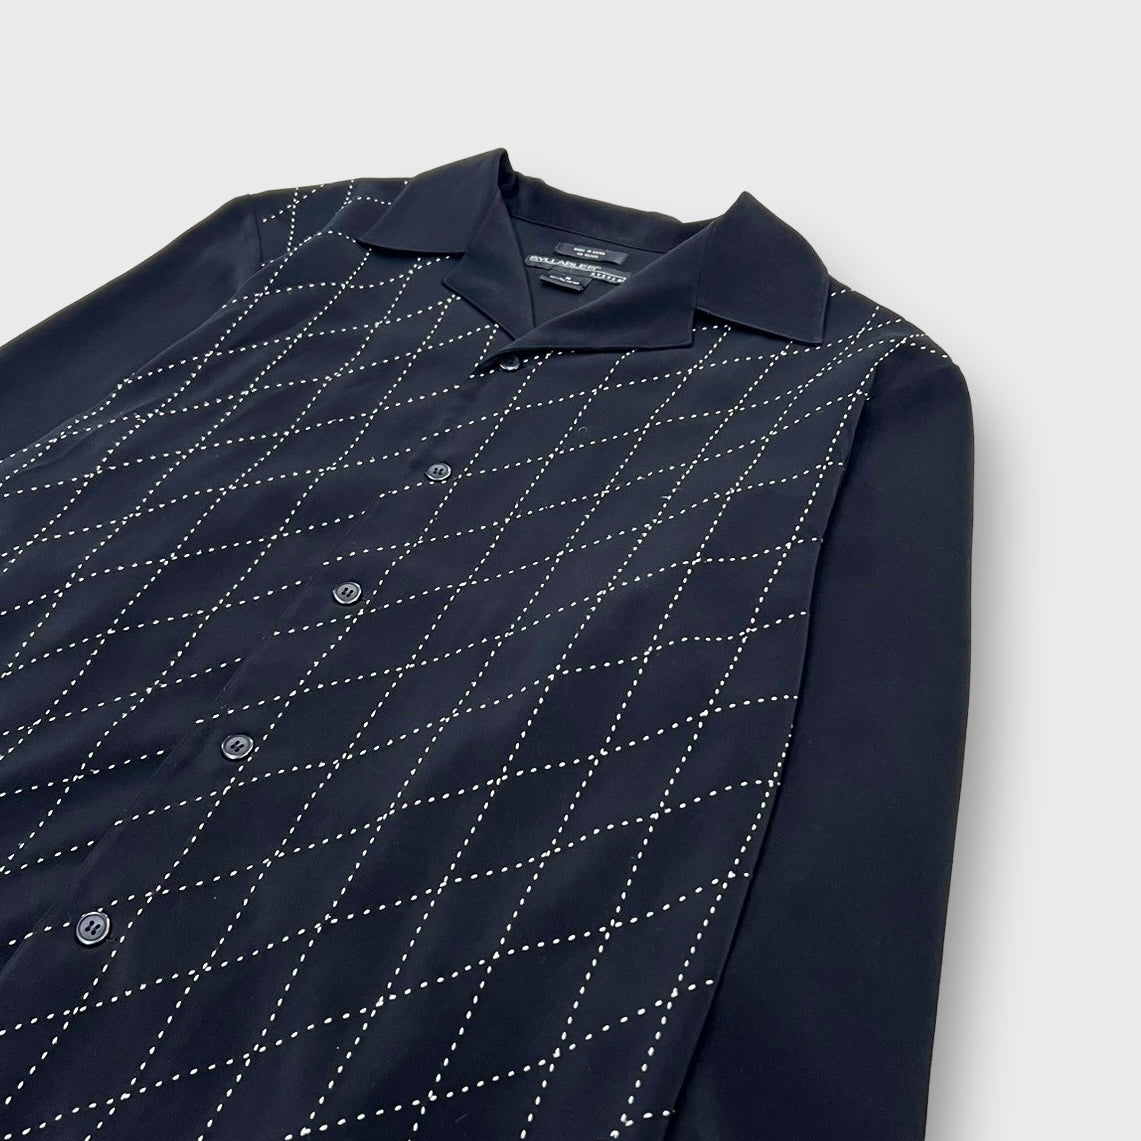 00's "SYLLABLES SYSTEM" All-over pattern shirt